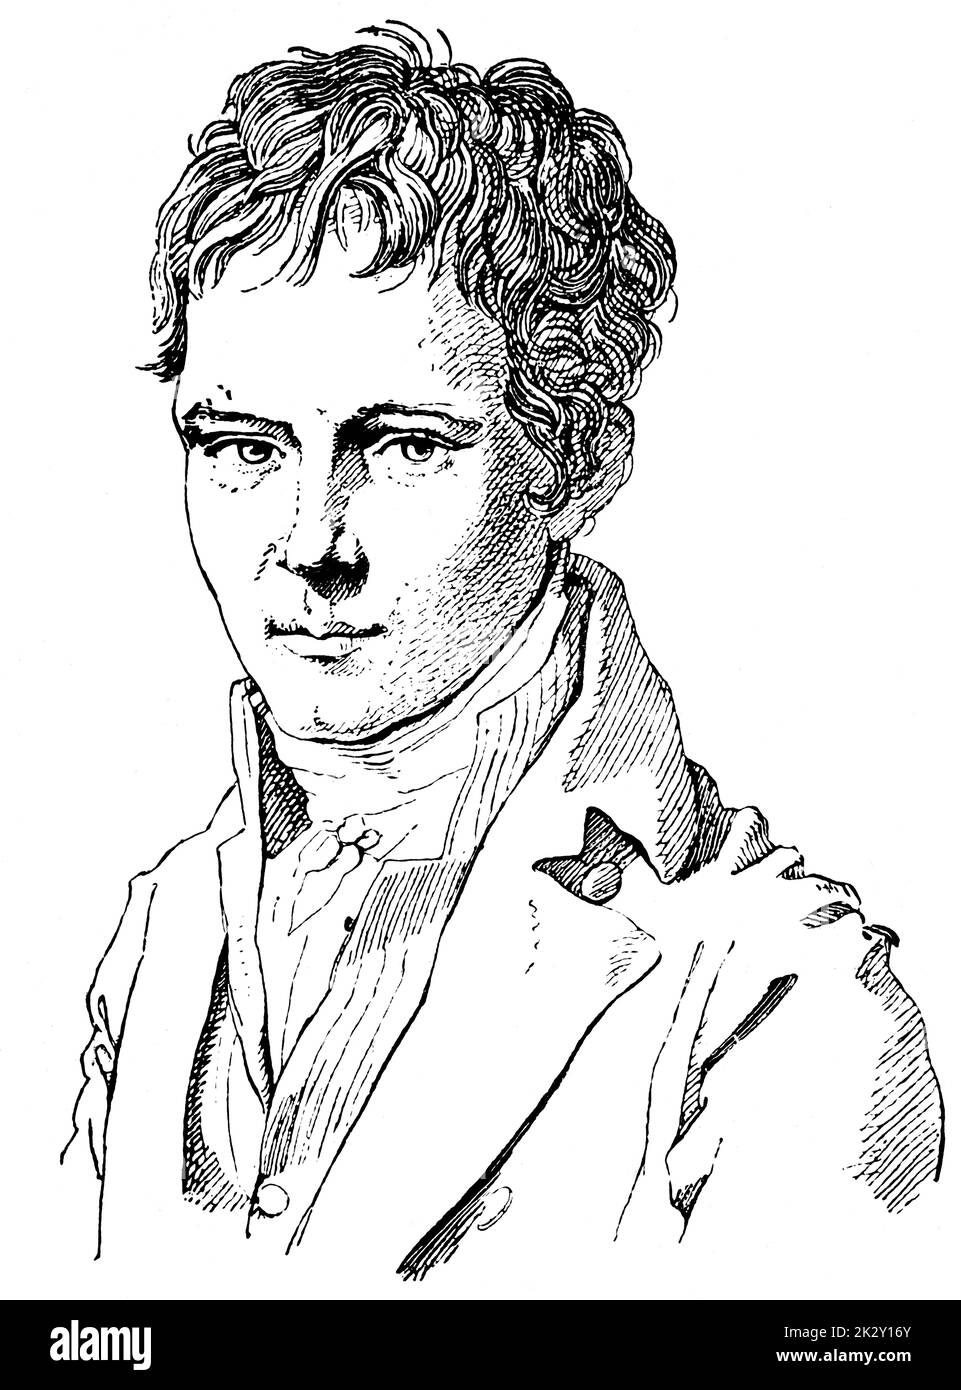 Portrait of Alexander von Humboldt (youth) - a German polymath, geographer, naturalist, explorer, and proponent of Romantic philosophy and science. Illustration of the 19th century. White background. Stock Photo